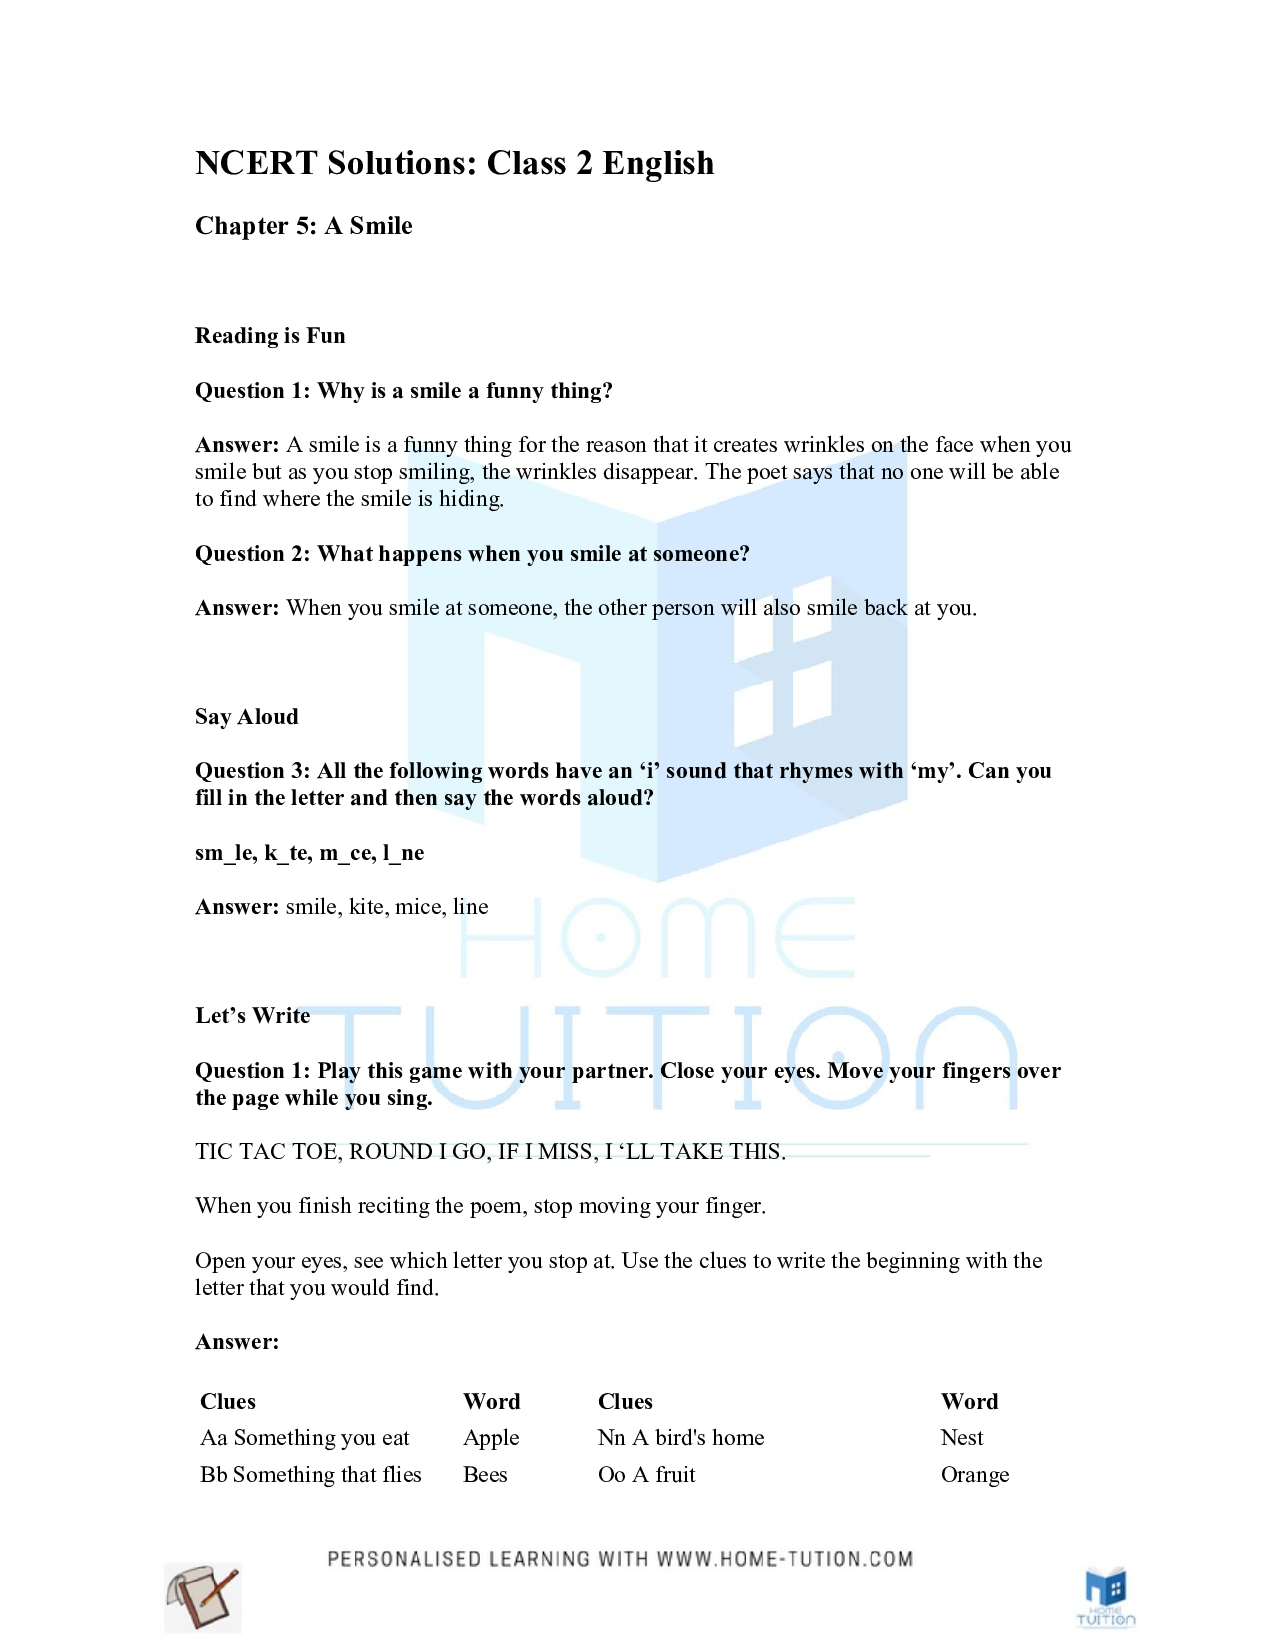 NCERT Solutions for Class 2 English A Smile